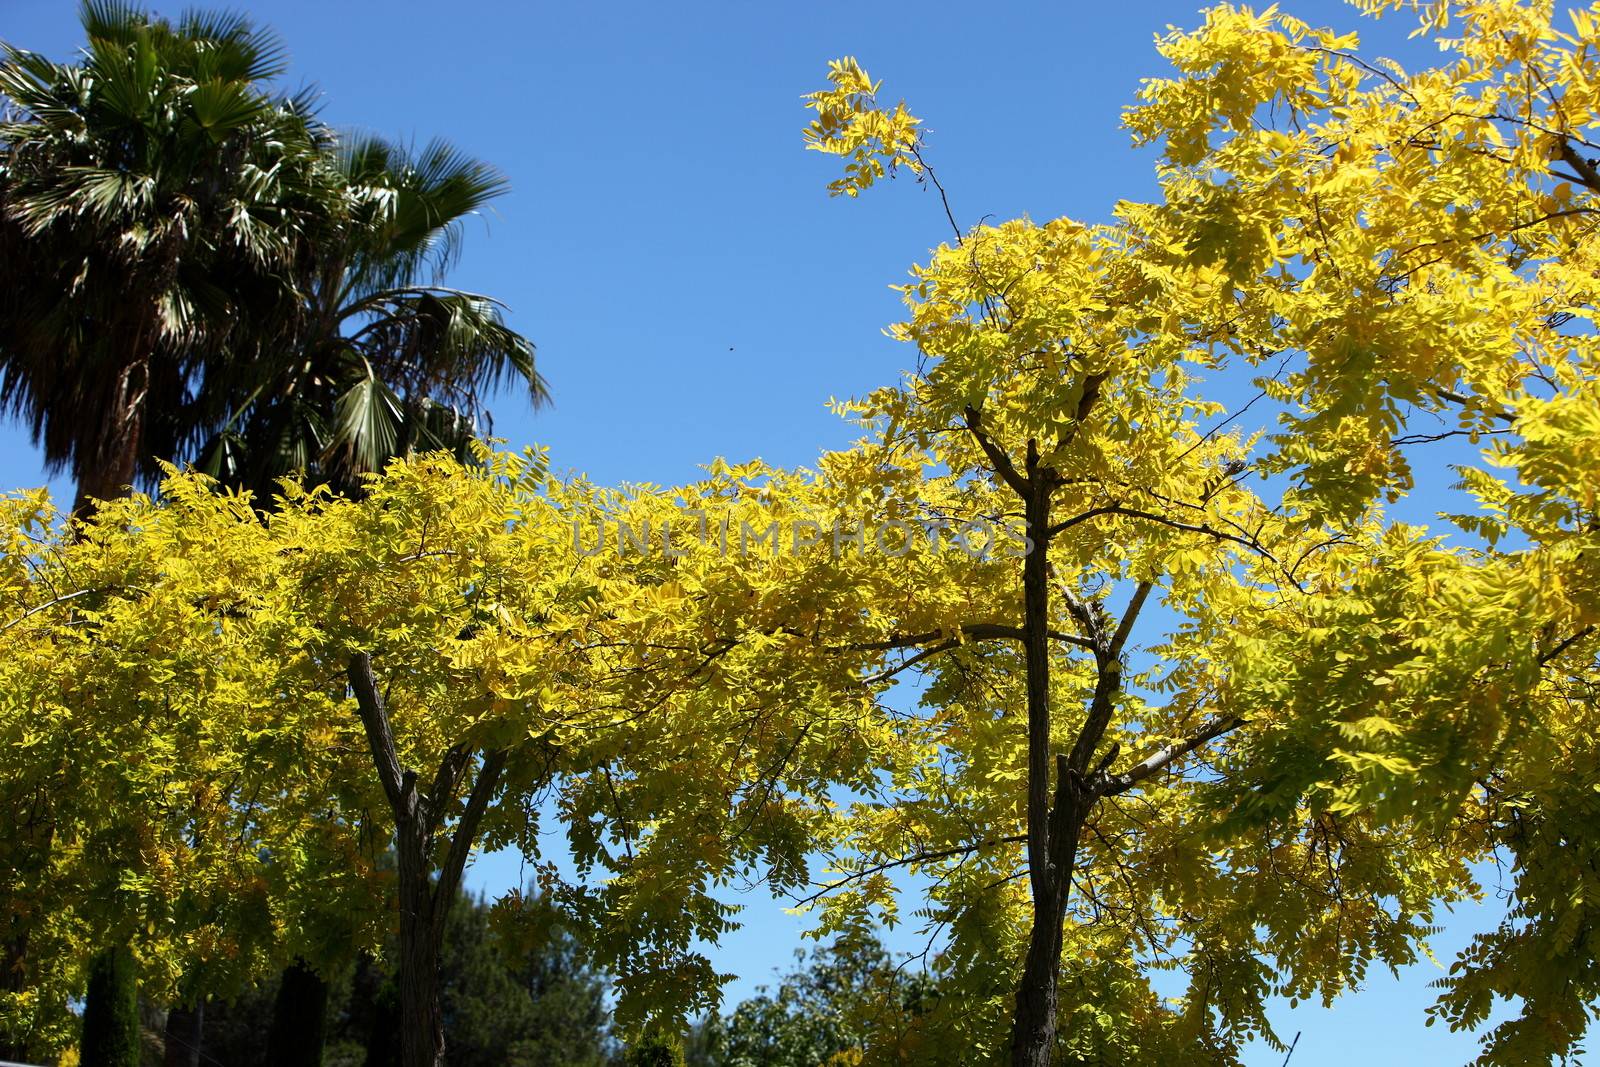 Spectacular yellow summer flowers and foliage on trees against a clear sunny blue sky